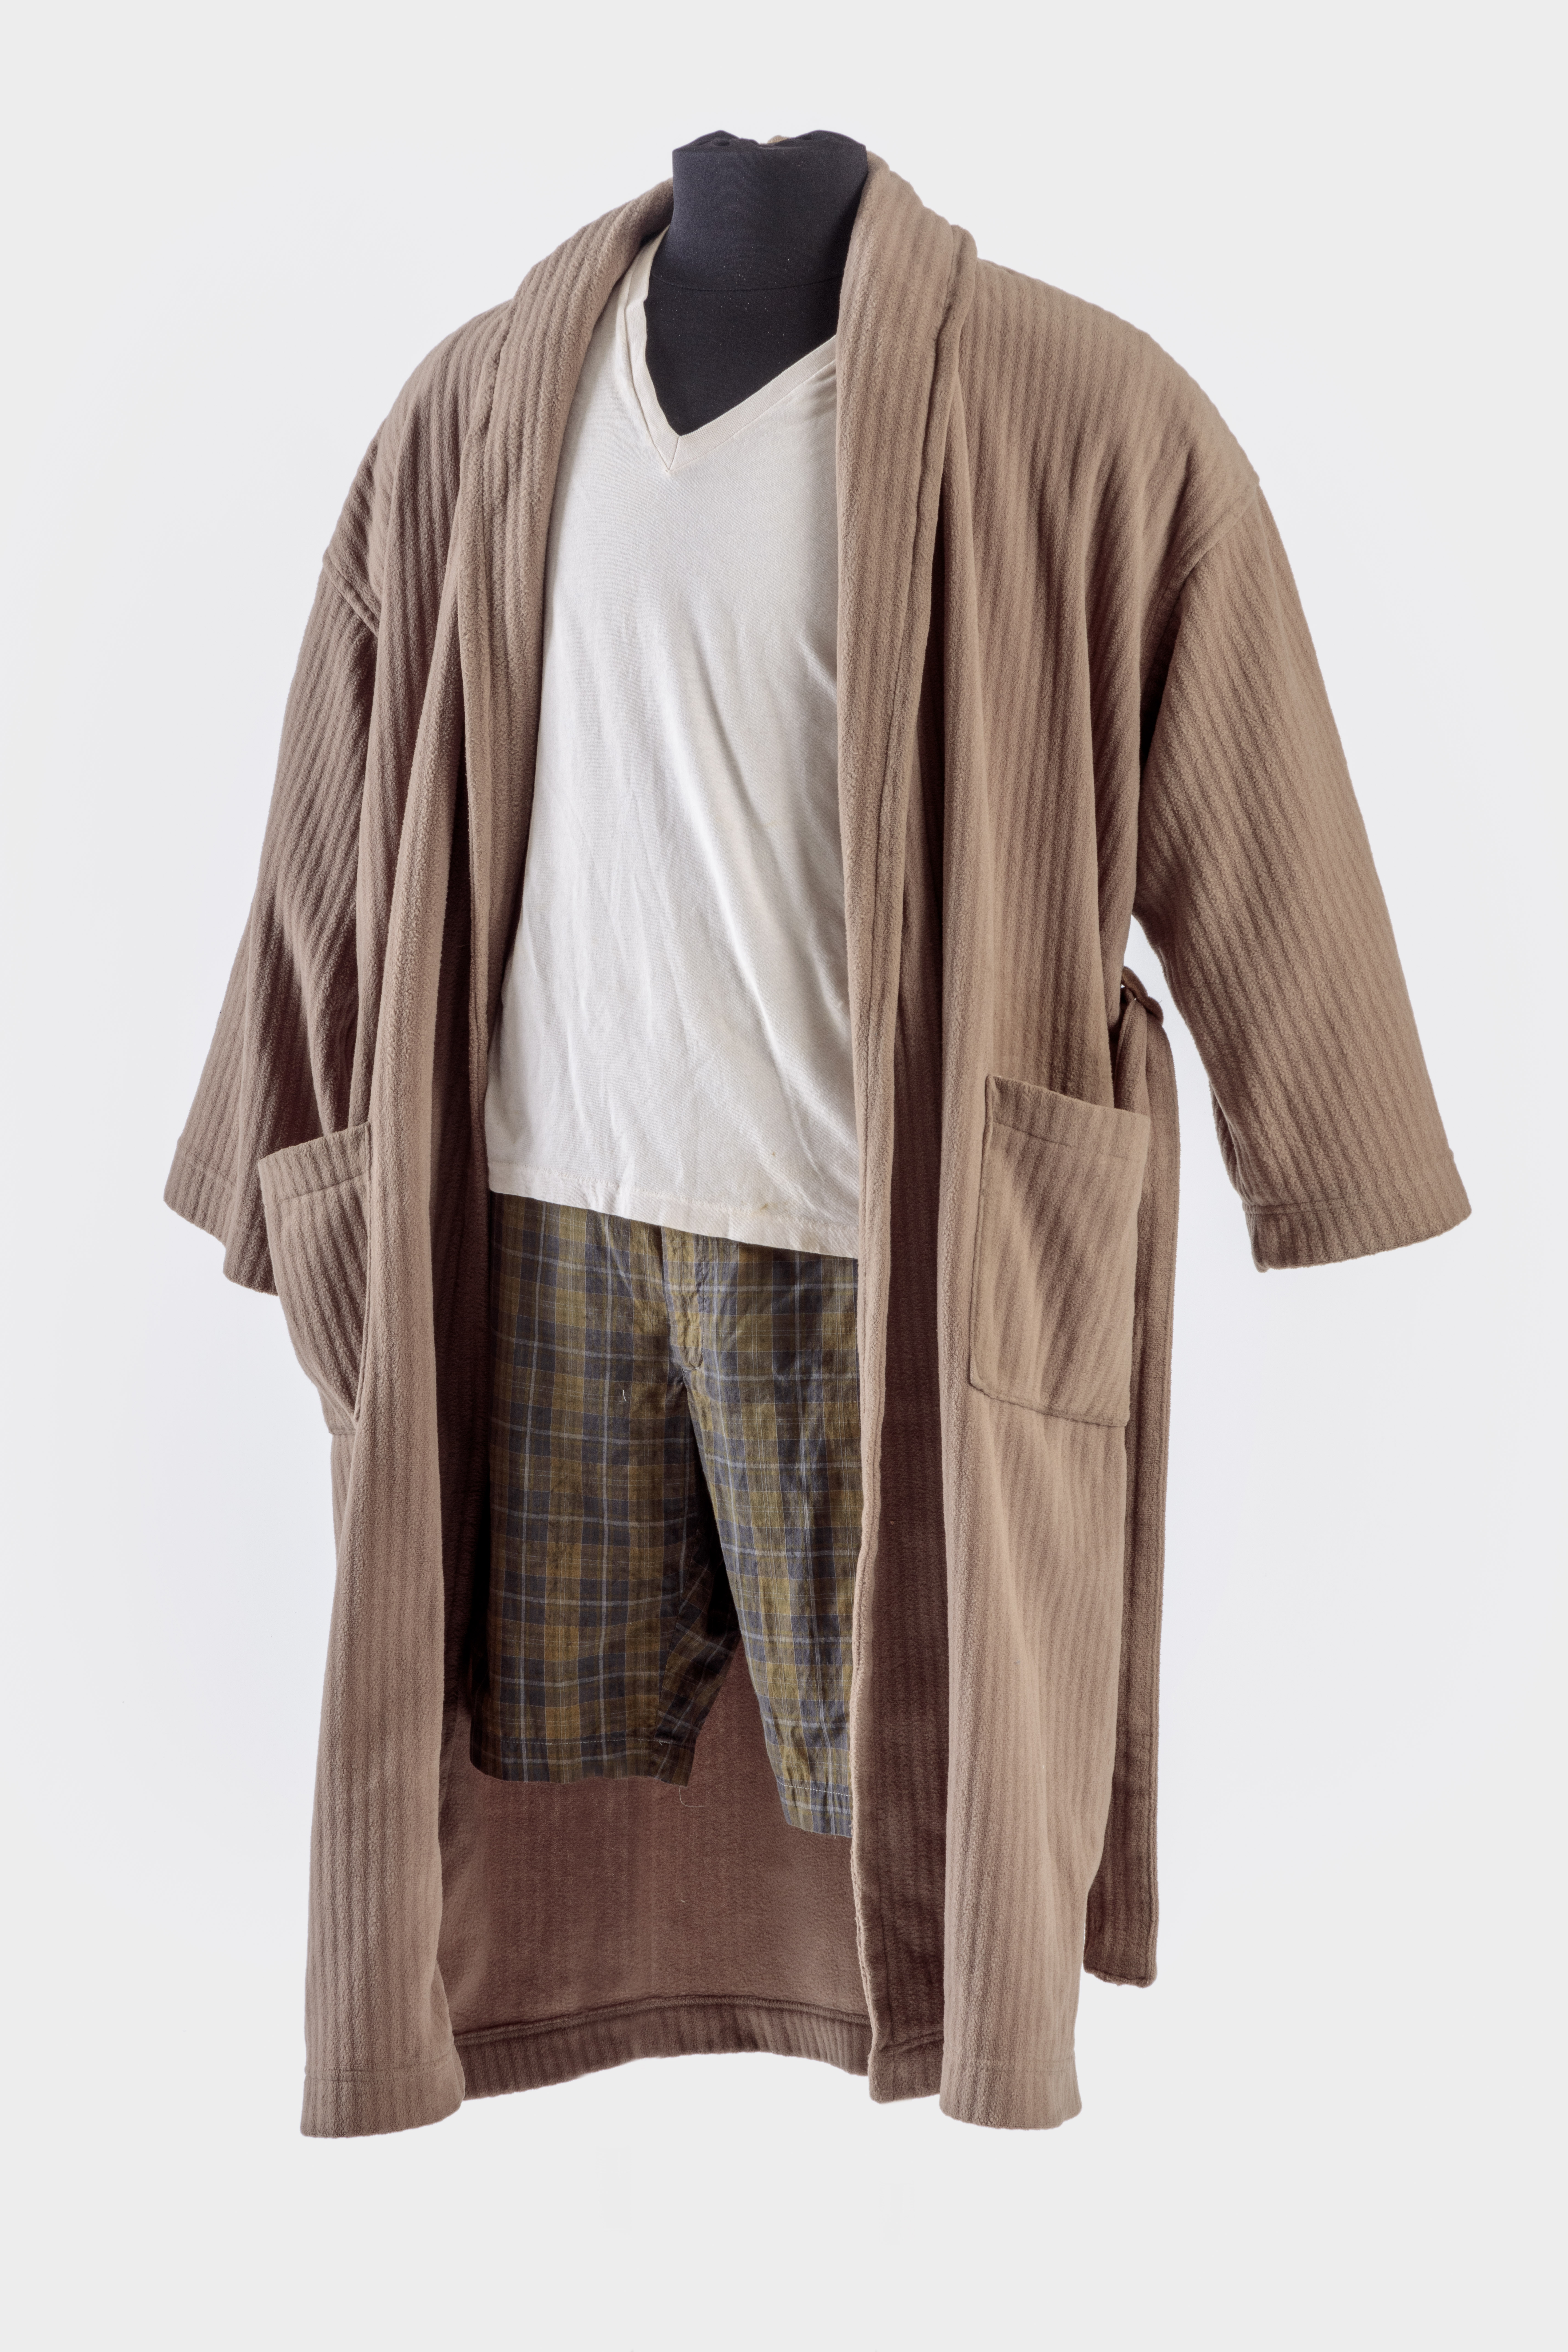 Dude's Go-to Garb from The Big Lebowski (see below scroll for details)*